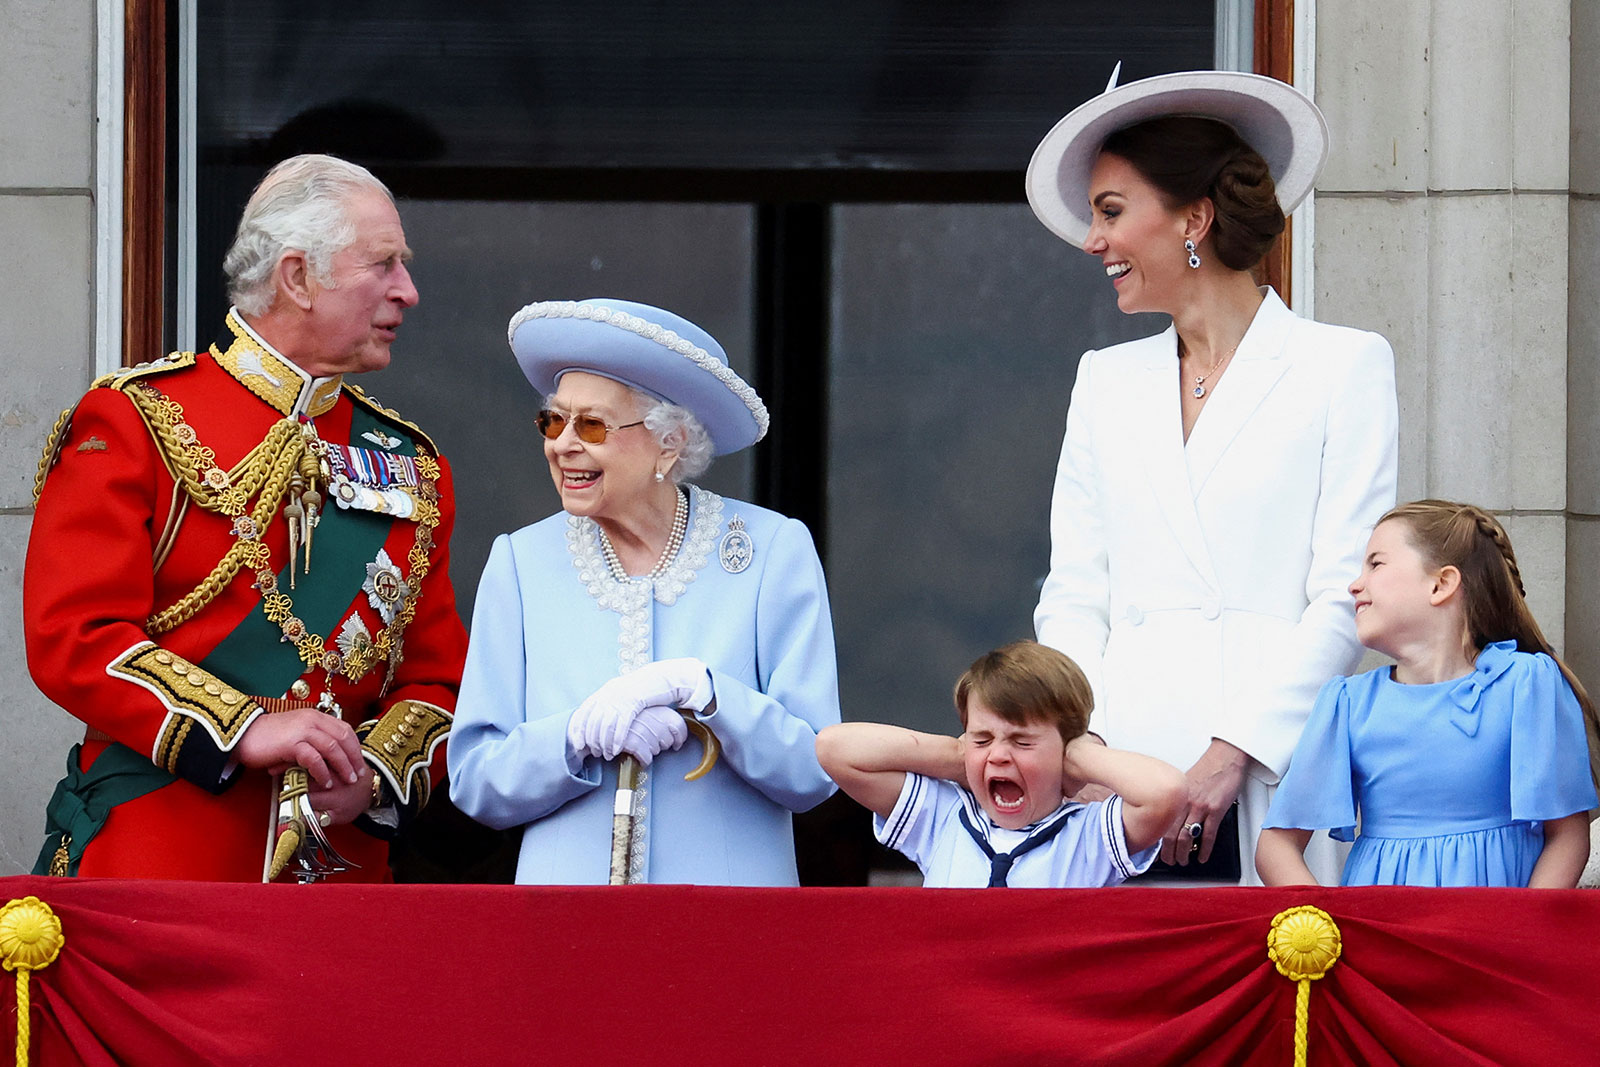 Britain's Queen Elizabeth, Prince Charles and Catherine, Duchess of Cambridge, along with Princess Charlotte and Prince Louis appear on the balcony of Buckingham Palace during the Queen's Platinum Jubilee celebrations in London on June 2.